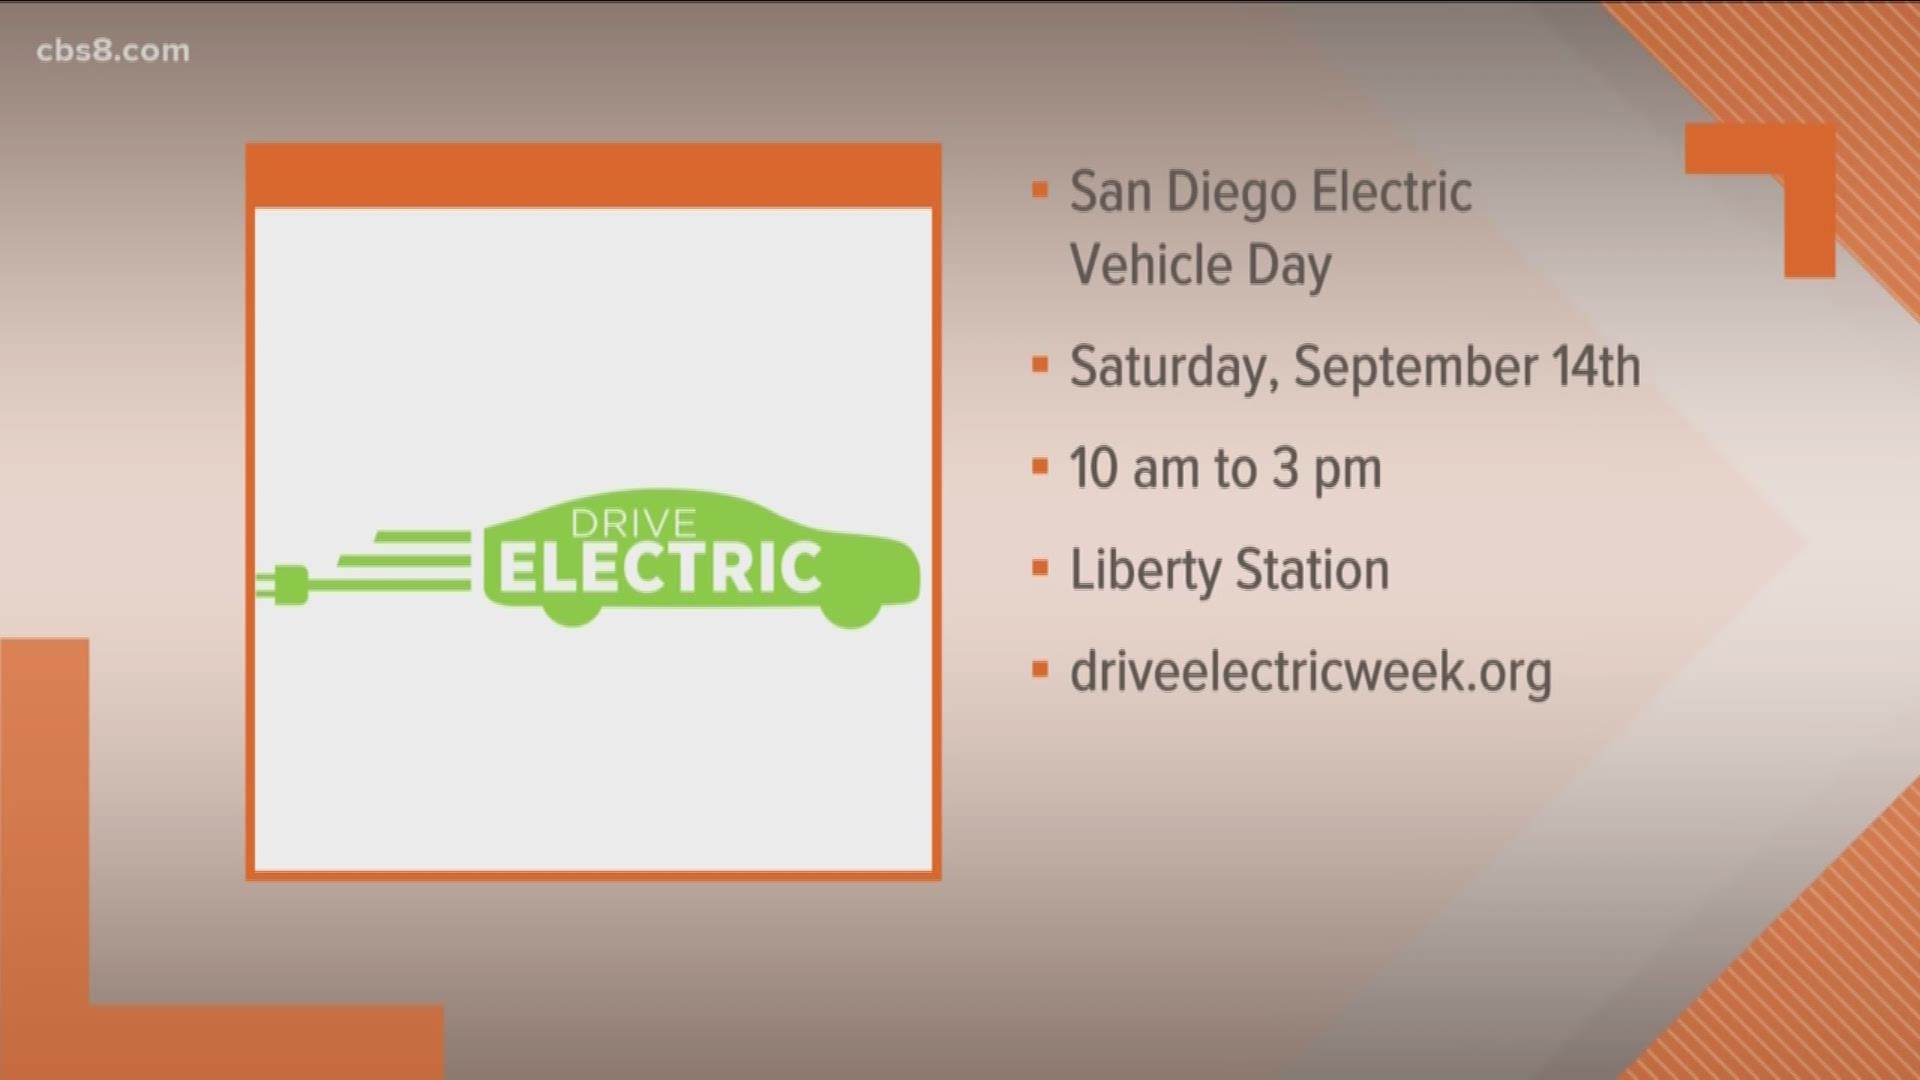 Electric Vehicle Association helps convert your opinion if not your car so you can say good bye to gas